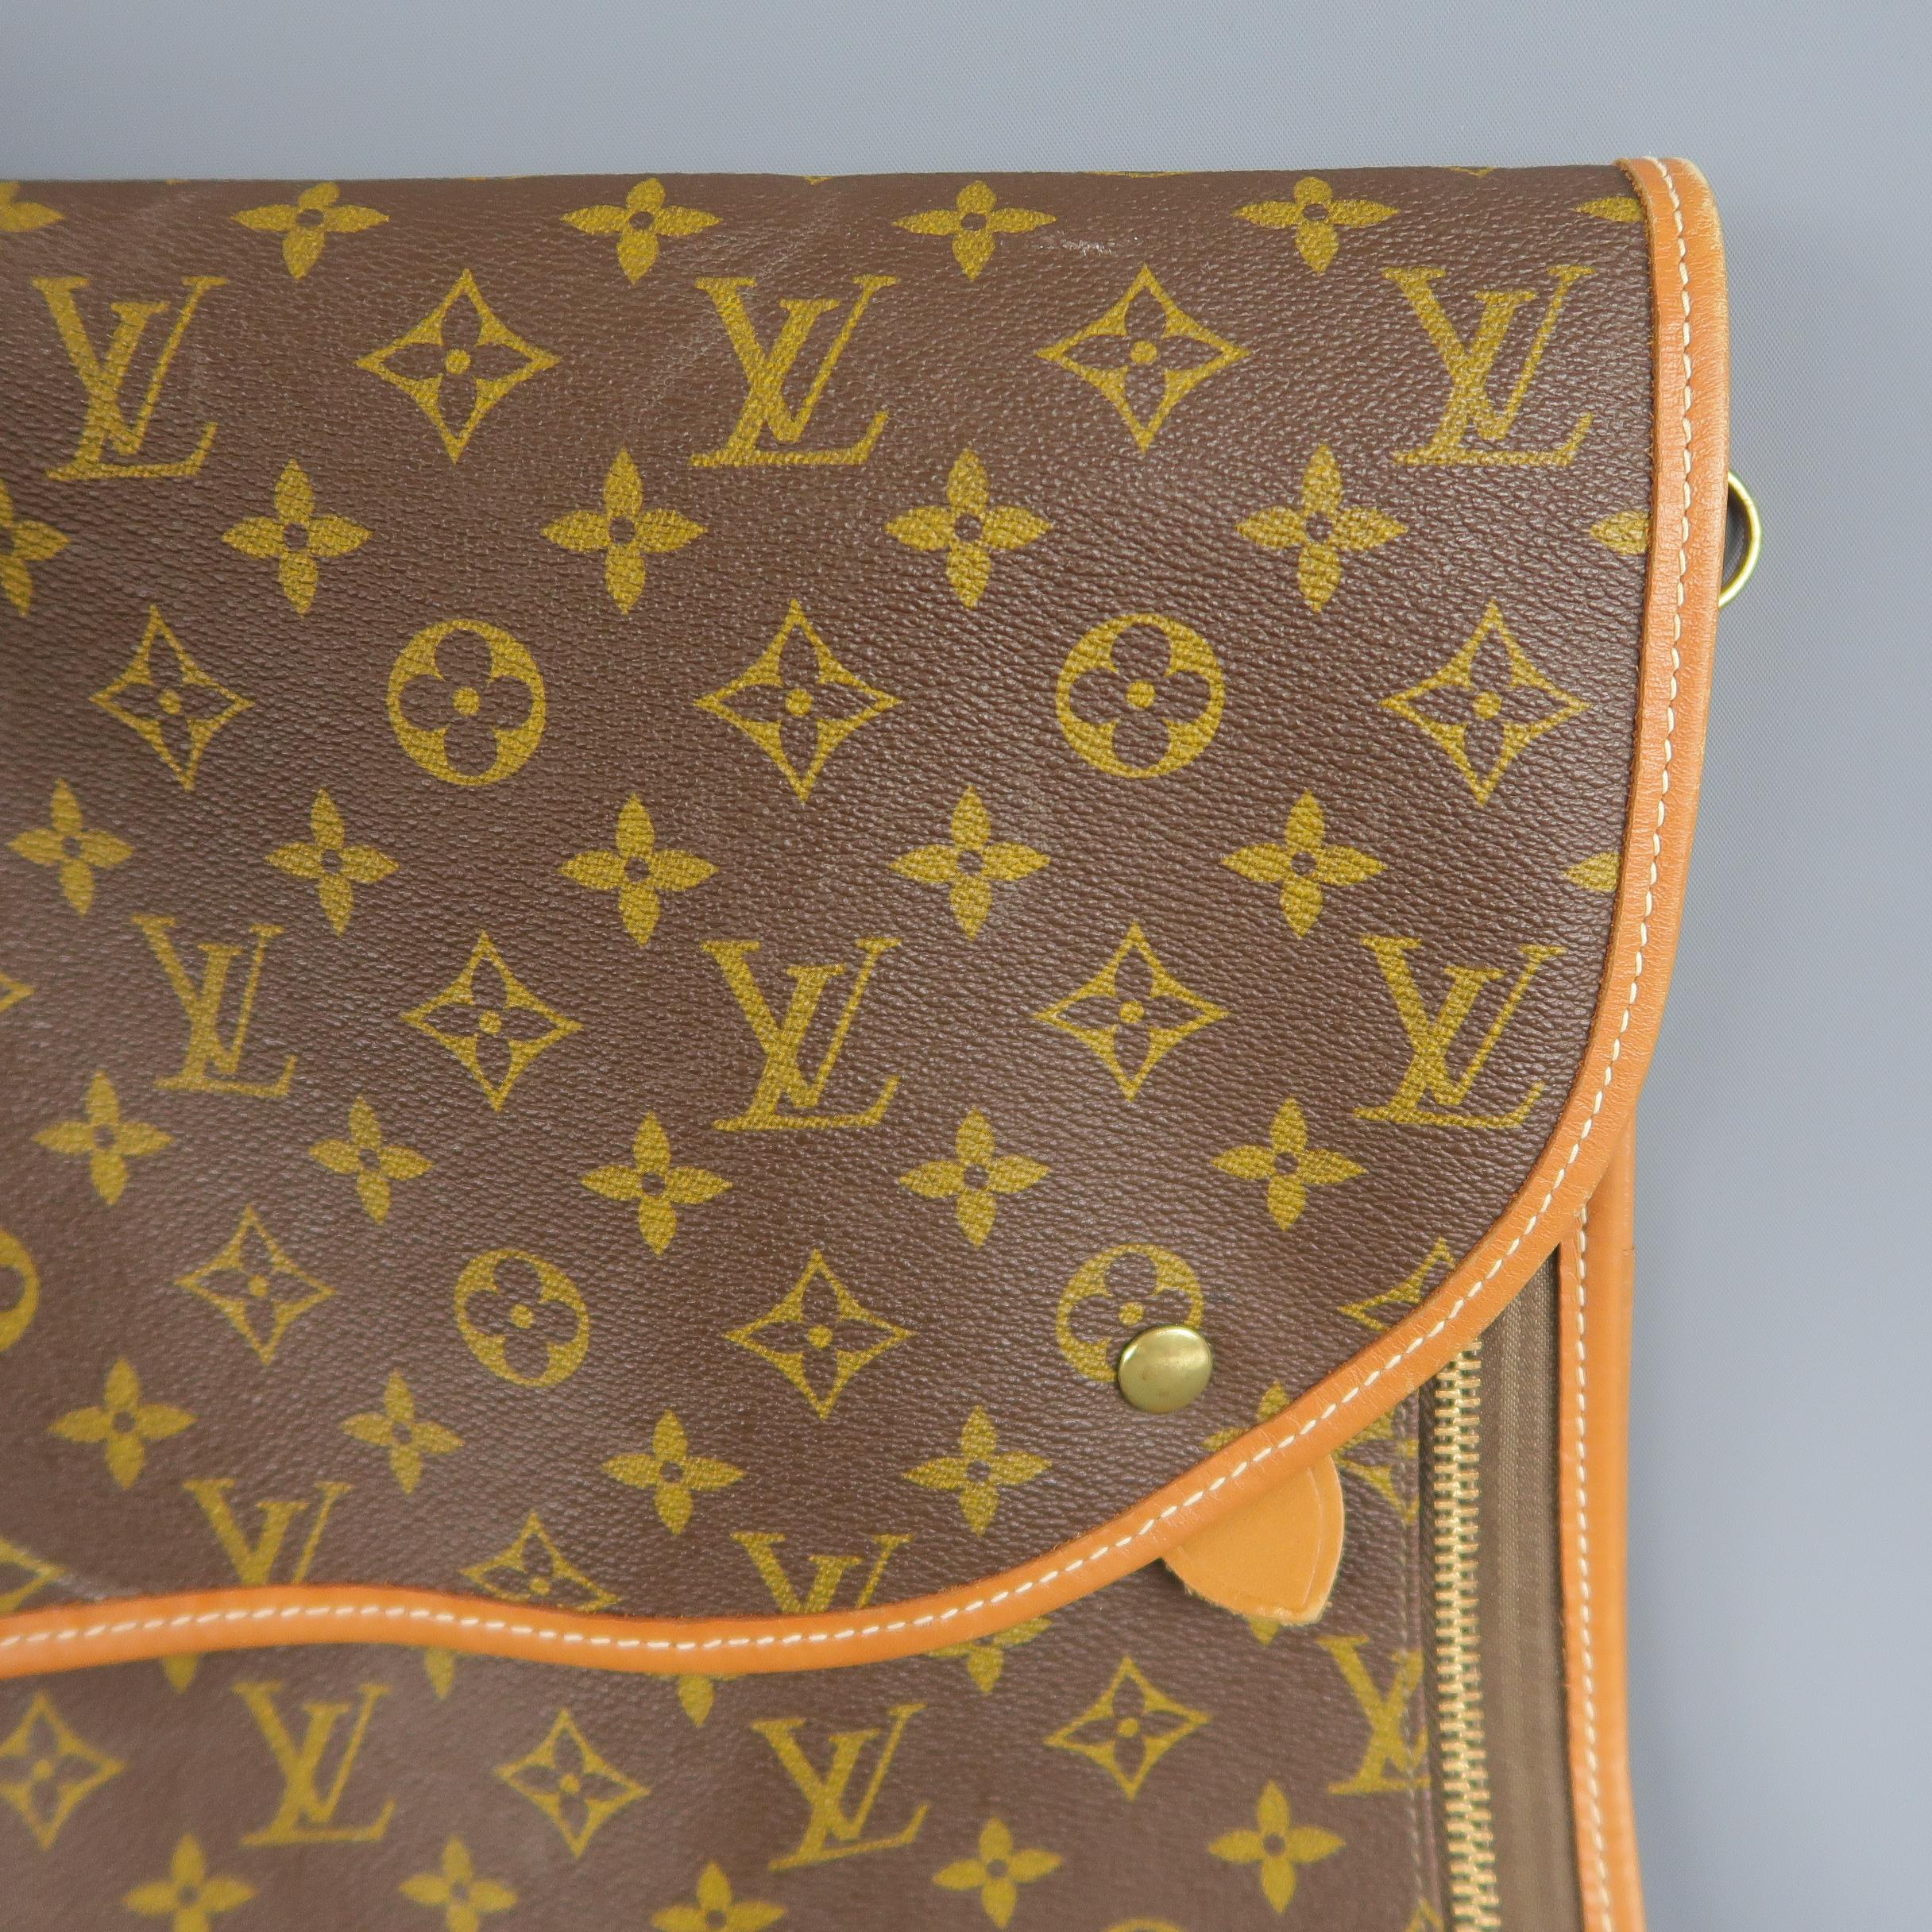 Vintage LOUIS VUITTON luggage interior pouch bag comes in classic brown and tan monogram coated canvas in a large rectangular shape with a flap double snap closure, vachetta leather piping, side hoops, and double zip interior closure. Minor wear